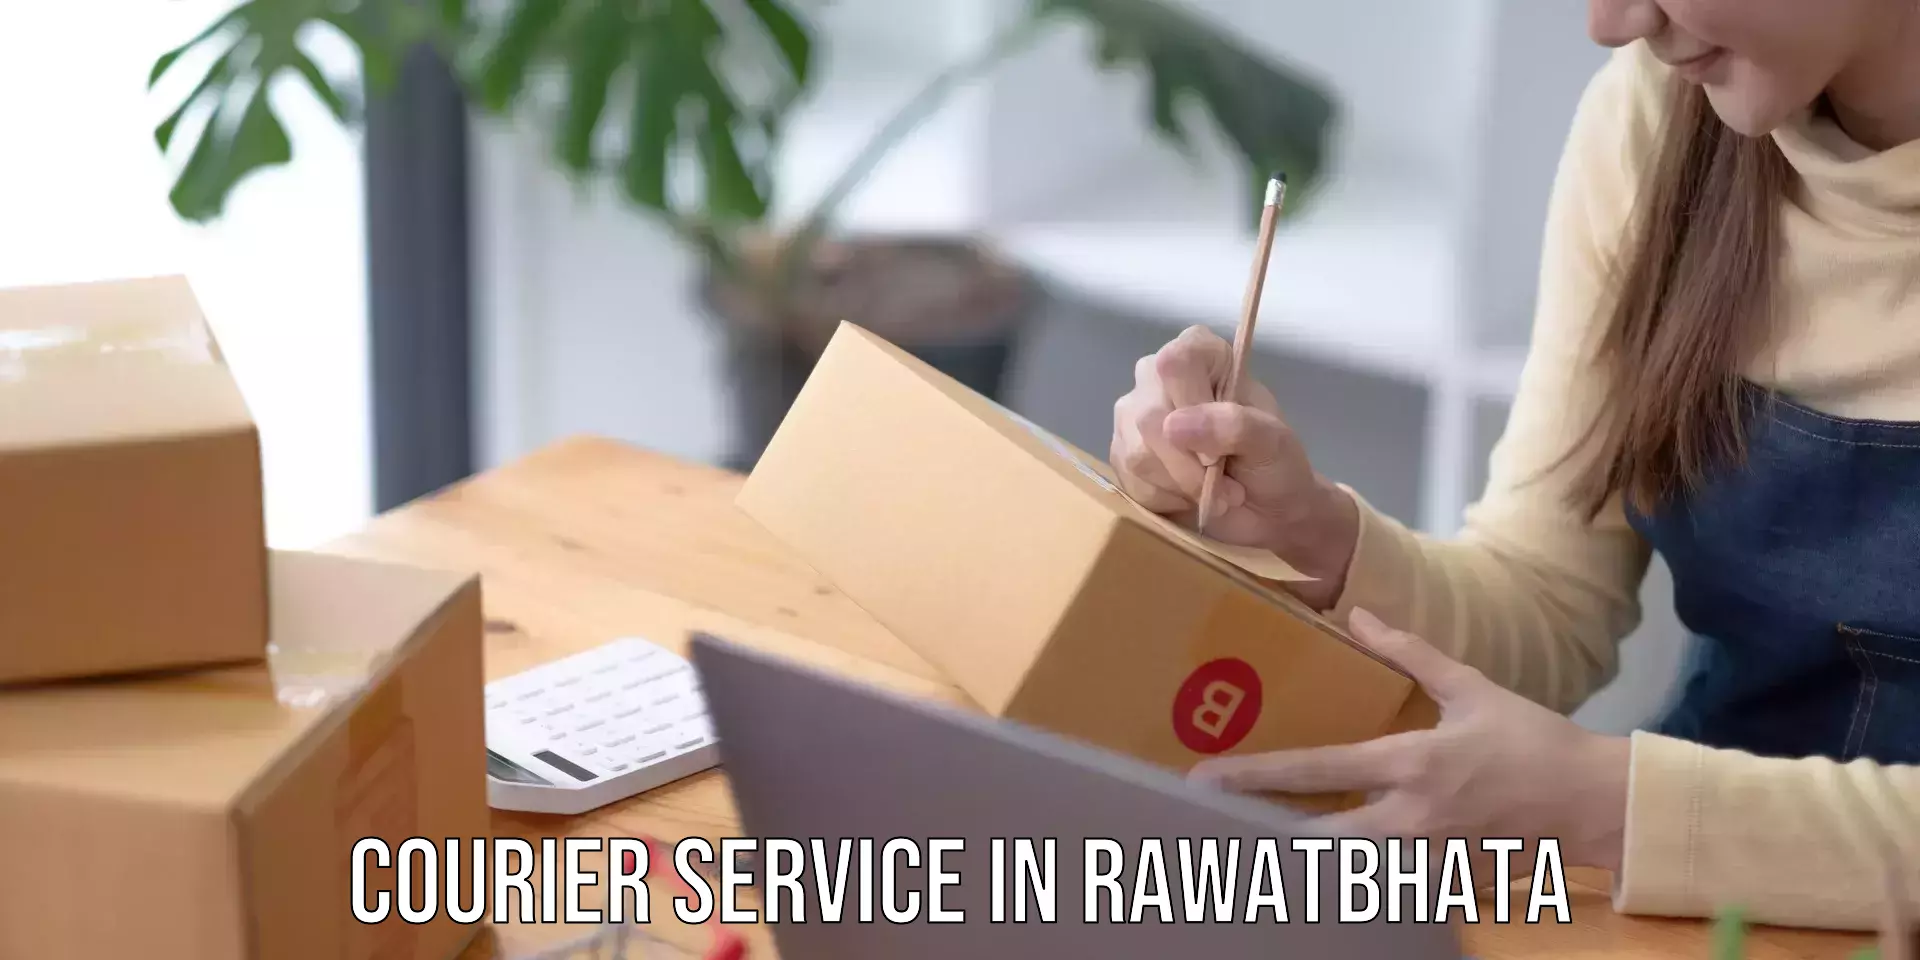 Easy access courier services in Rawatbhata